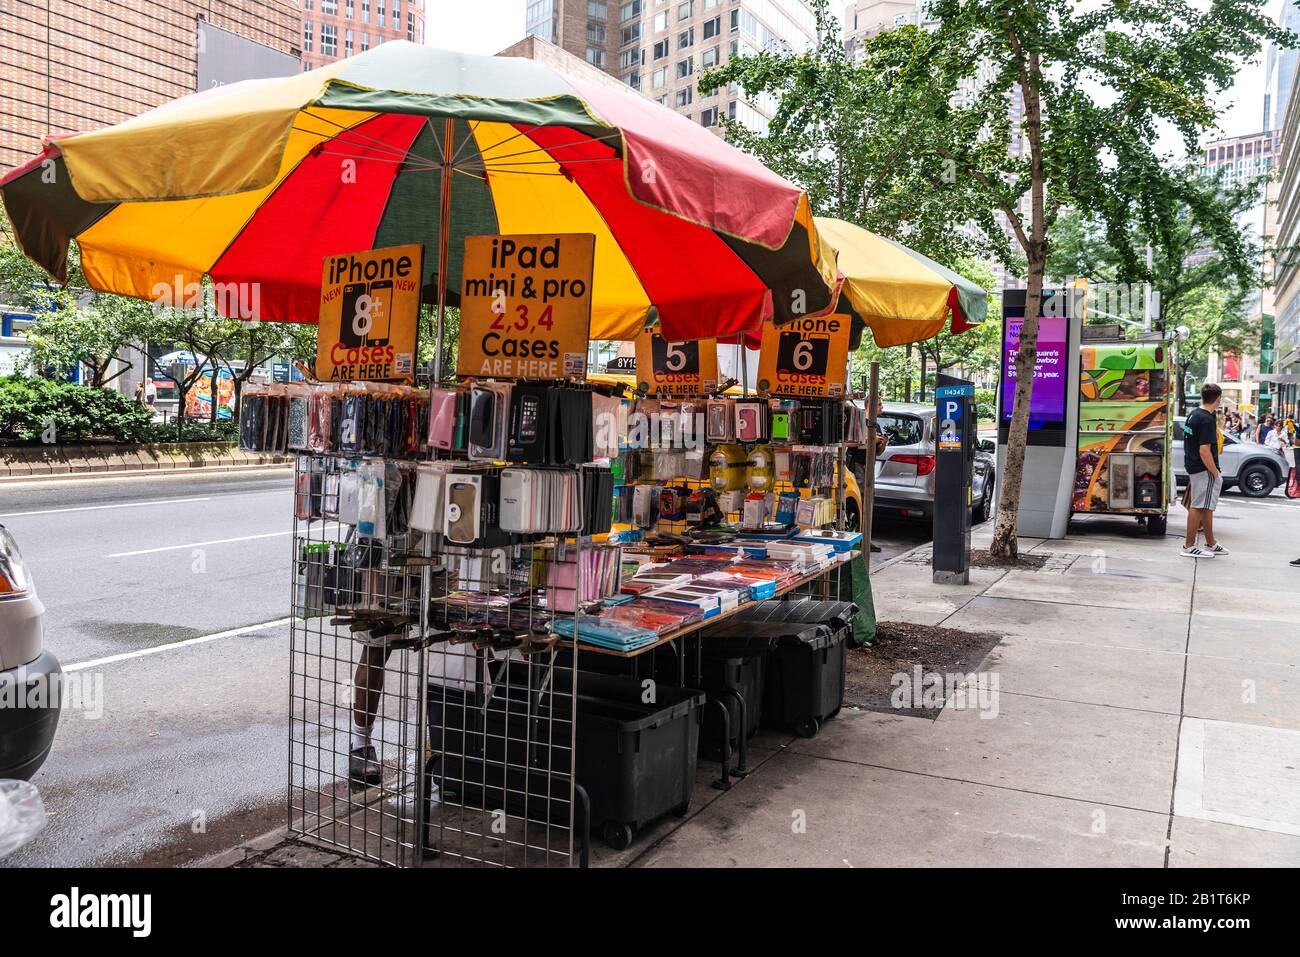 New York City, USA - August 3, 2018: Stall selling telephone and electronic accessories in the street with people around in Manhattan, New York City, Stock Photo